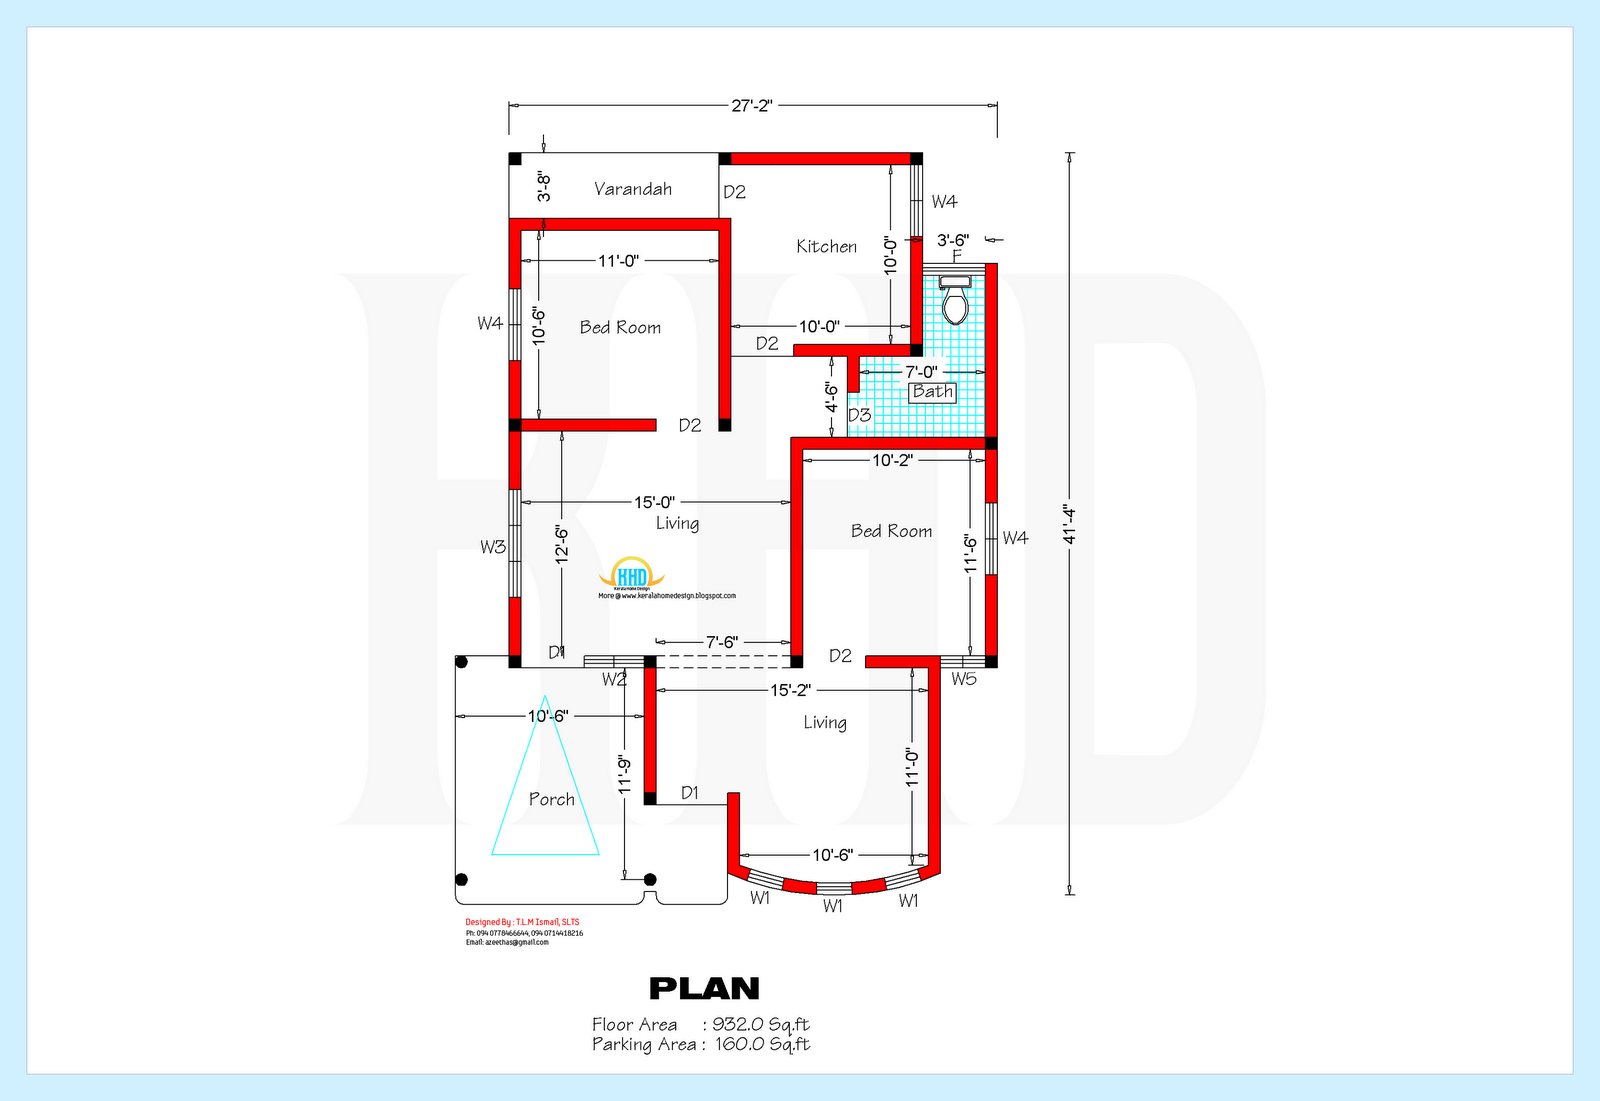 Very Best 1200 Sq Ft. House Plans 1600 x 1101 · 202 kB · png